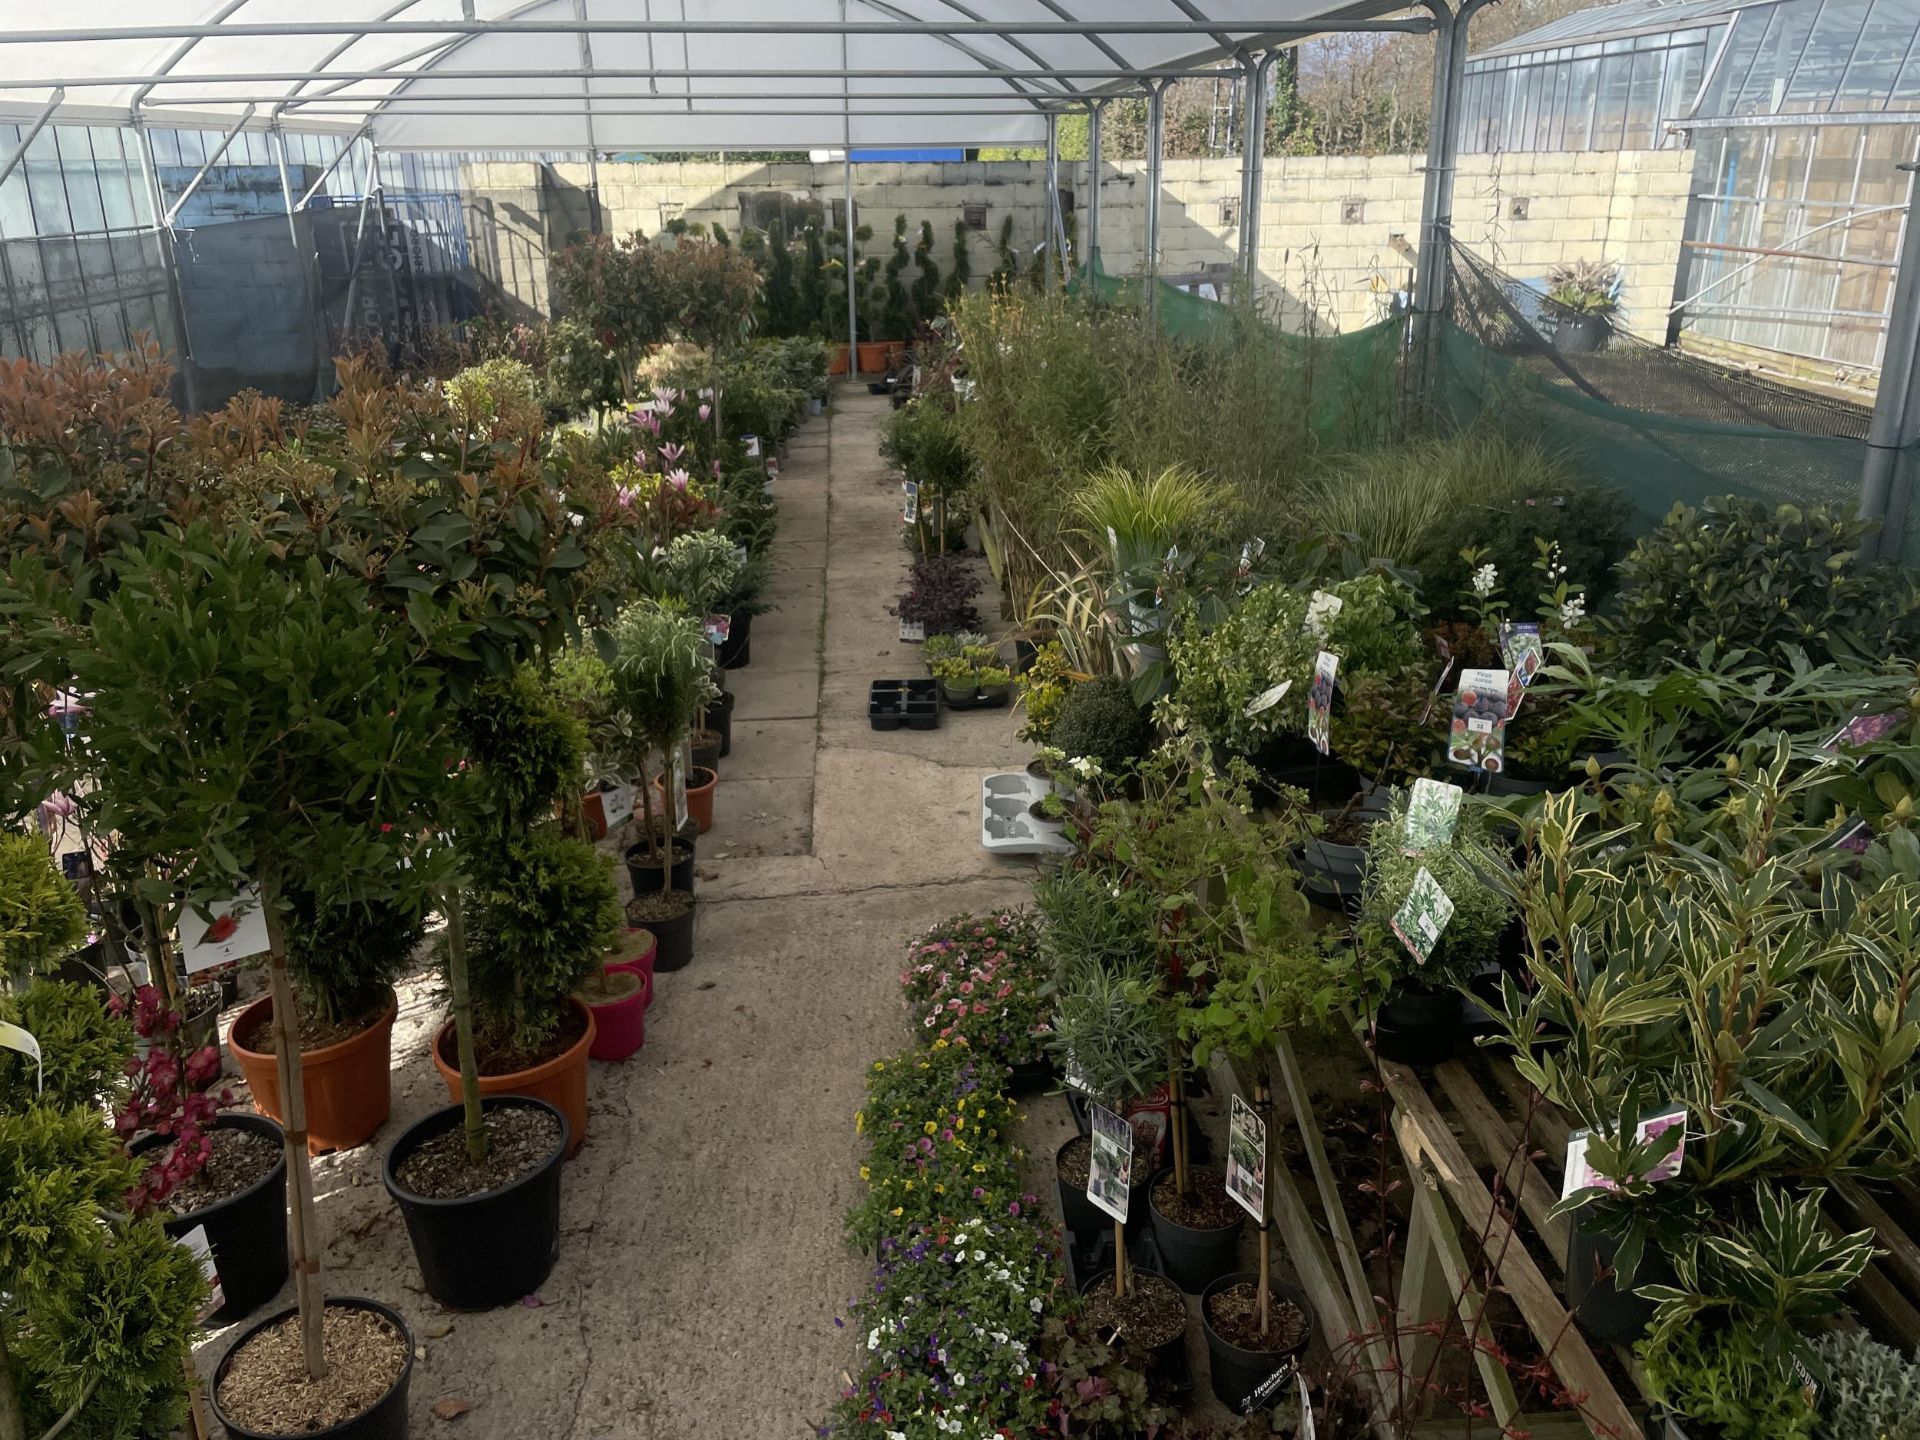 WELCOME TO ASHLEY WALLER HORTICULTURE AUCTION - LOTS ARE BEING ADDED DAILY - THE IMAGES SHOW LOTS - Image 6 of 51